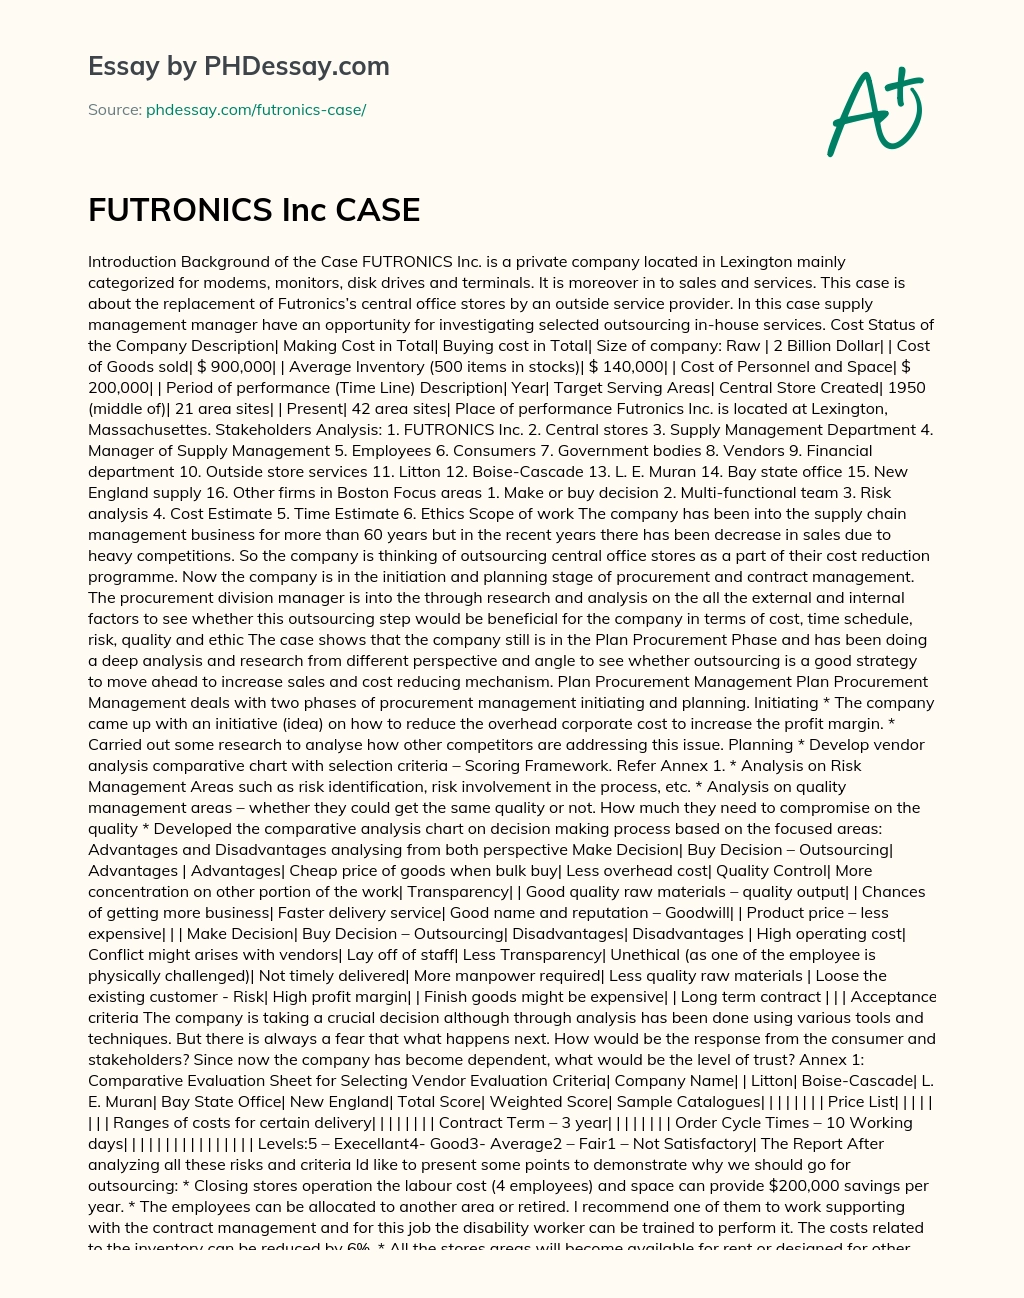 Analysis of Outsourcing Central Stores for FUTRONICS Inc essay